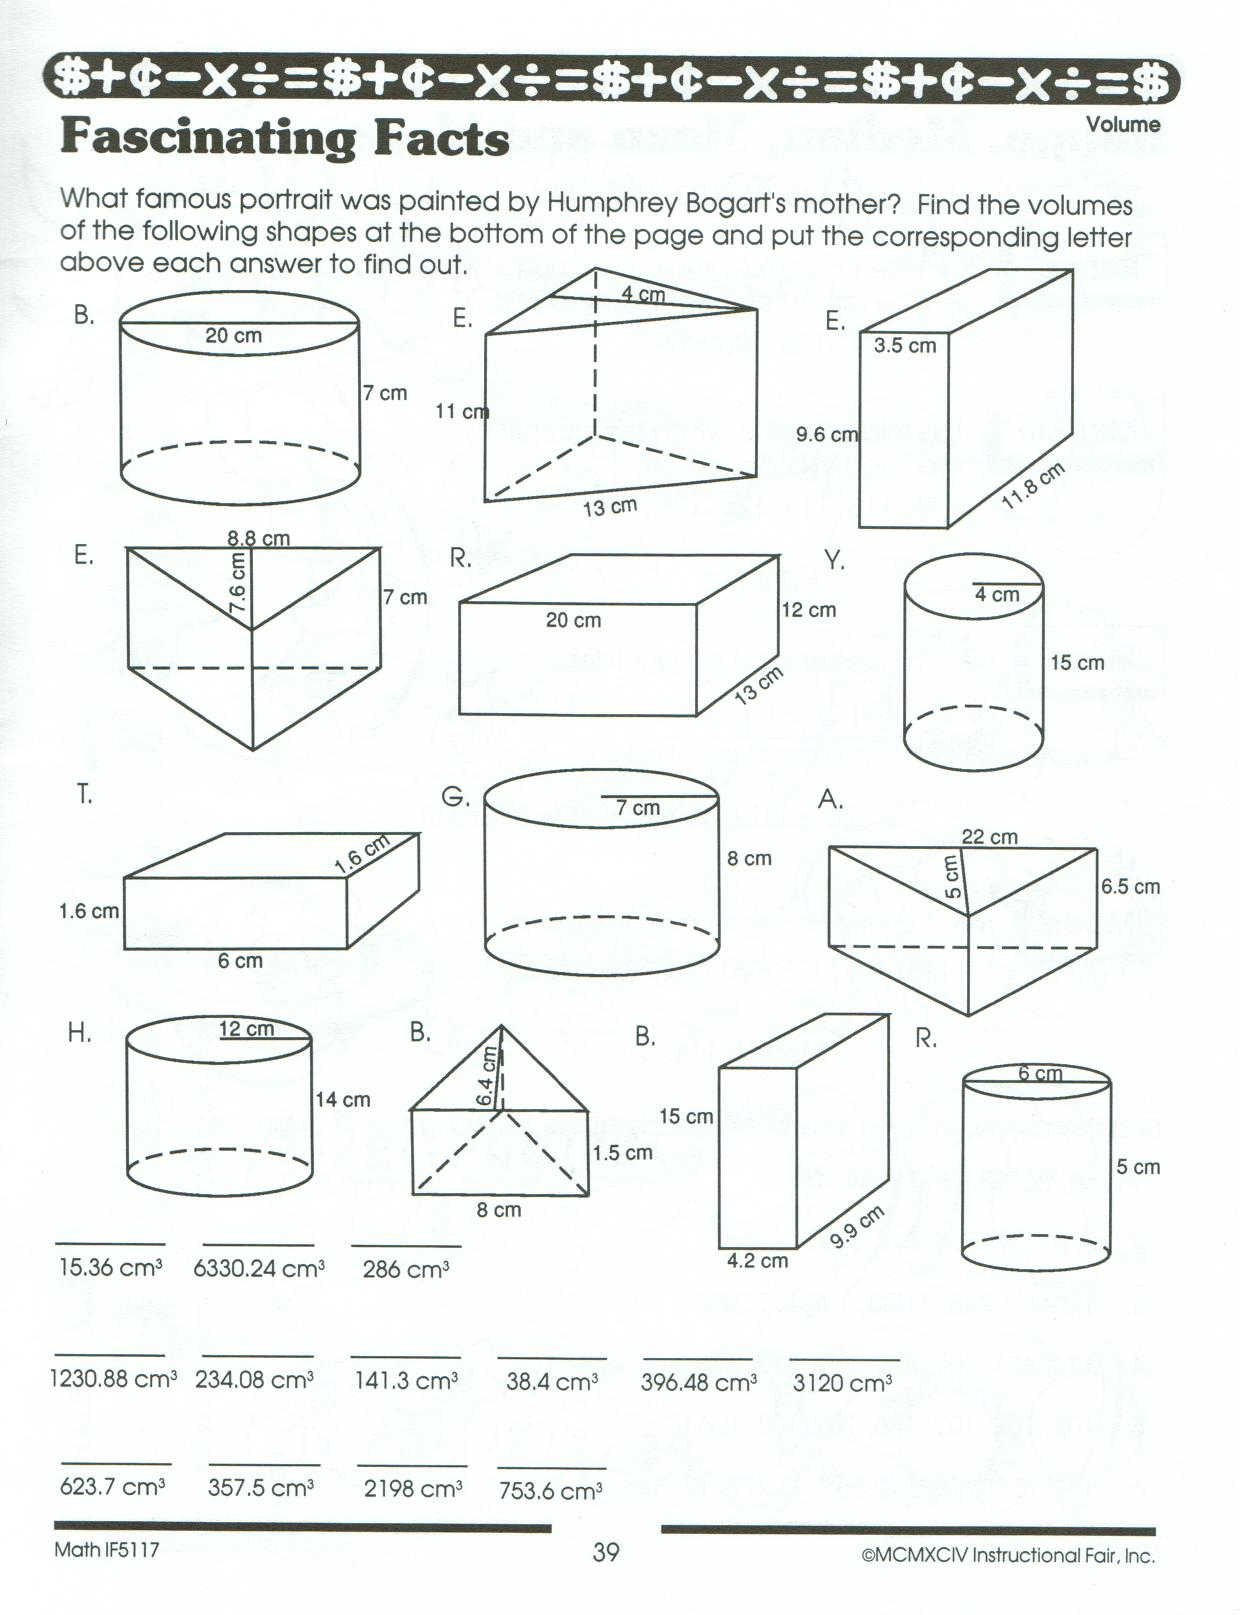 volume-and-surface-area-math-worksheets-the-best-image-8th-gr-db